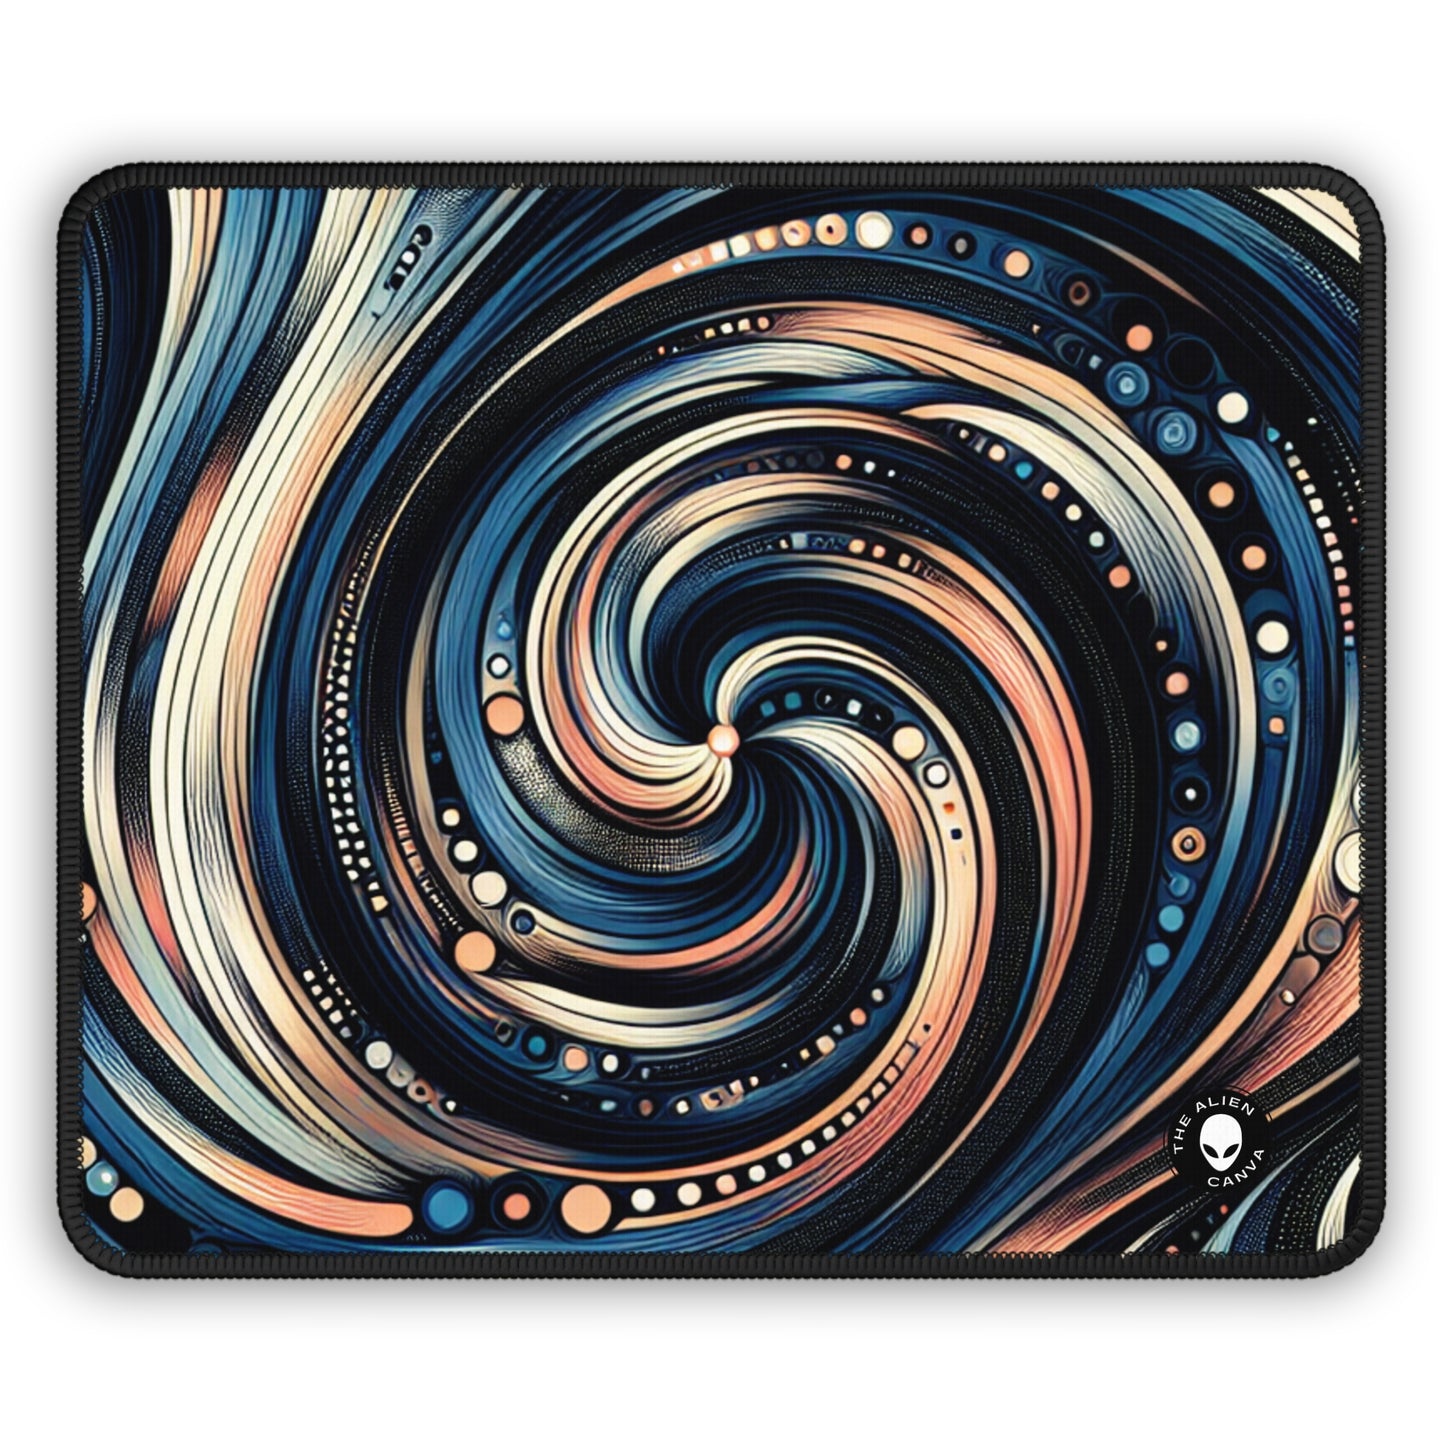 "Chaos in Harmony: A Dynamic Generative Art Exploration" - The Alien Gaming Mouse Pad Generative Art